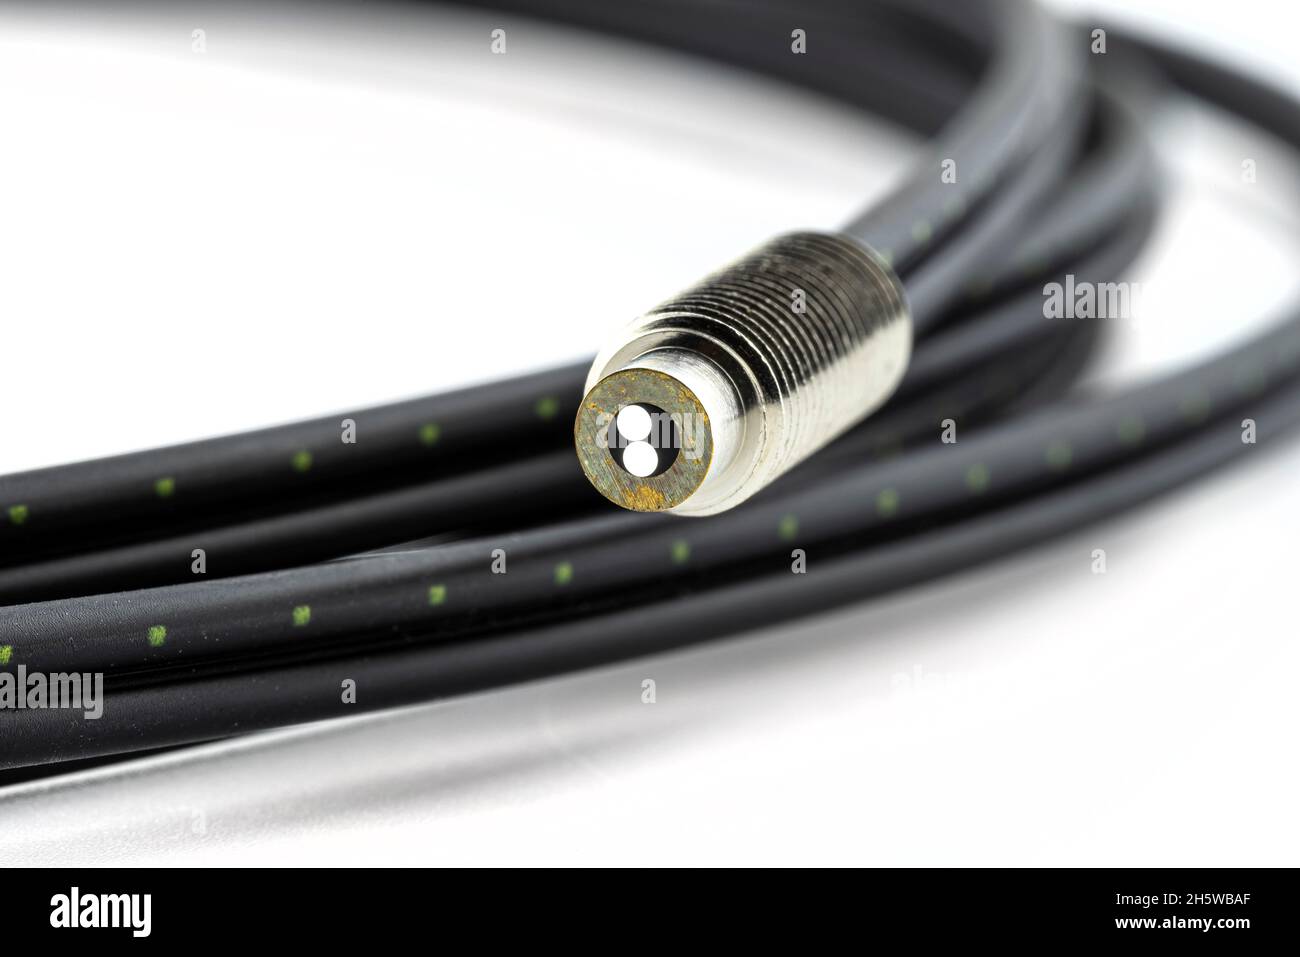 Macro photo of a fiber optic cable with two inserts, isolated on a white background, terminated with a thread. Stock Photo